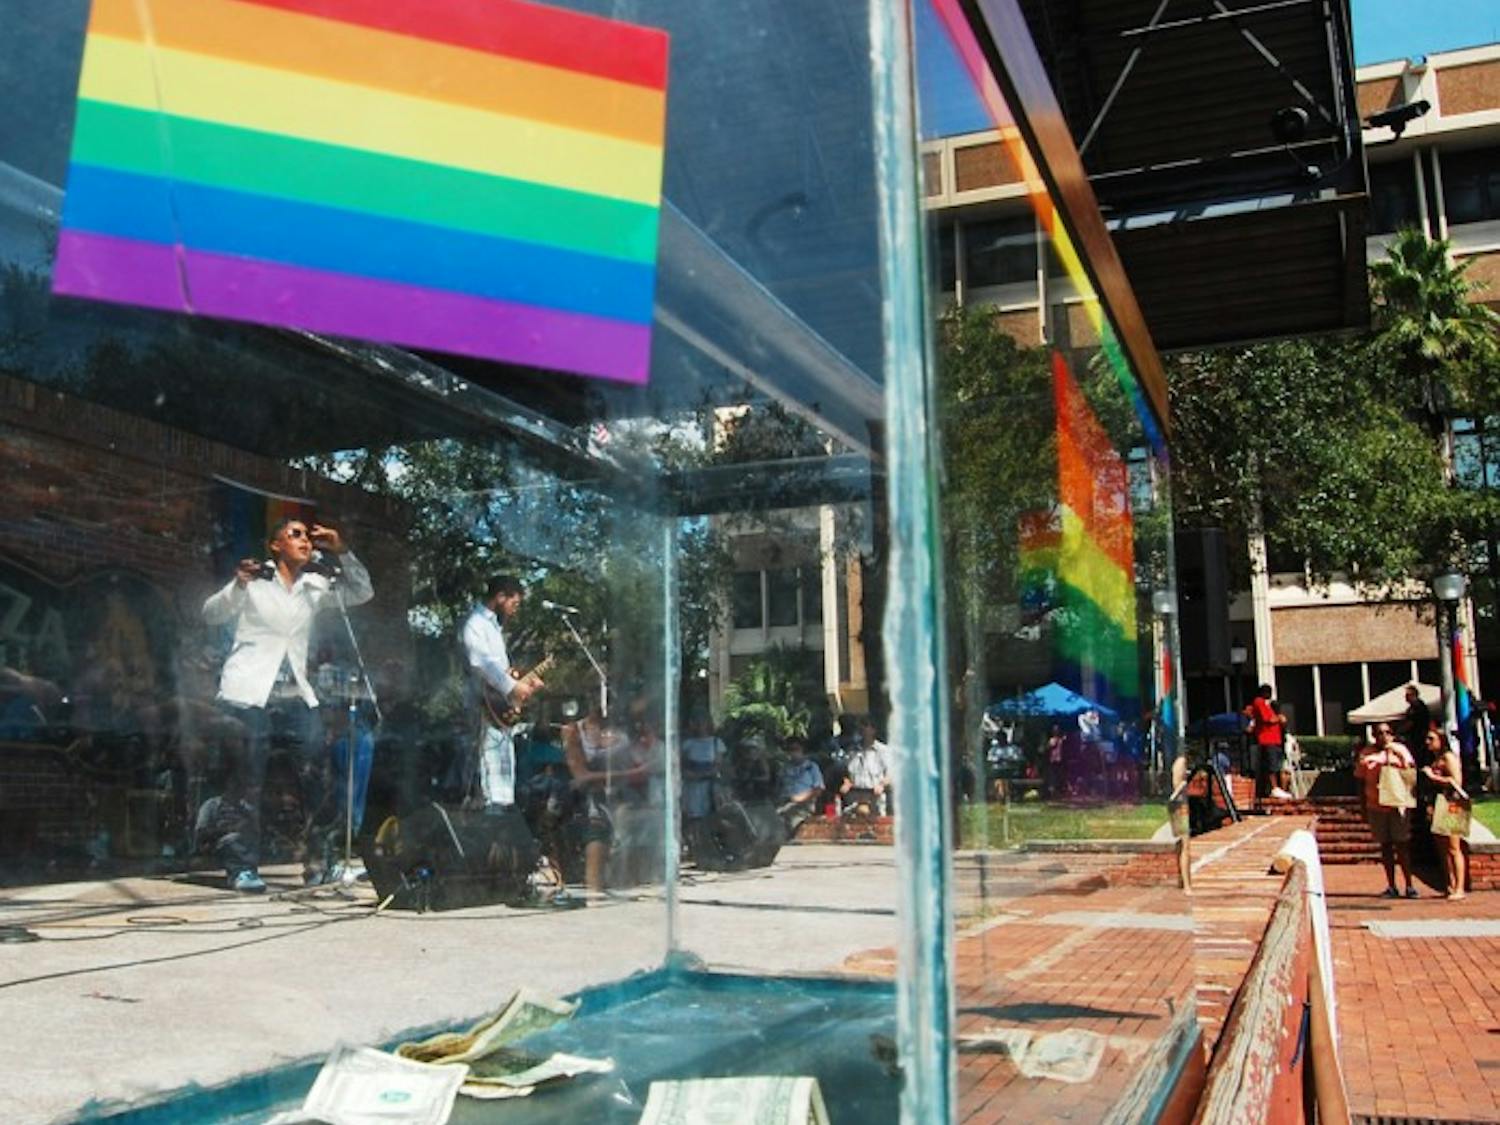 The band Captain Lovely plays on the Bo Diddley Community Plaza stage during the Pride Festival on Saturday. A collection tank was set up for people to tip the entertainers and to raise money for other LGBT events around Gainesville.